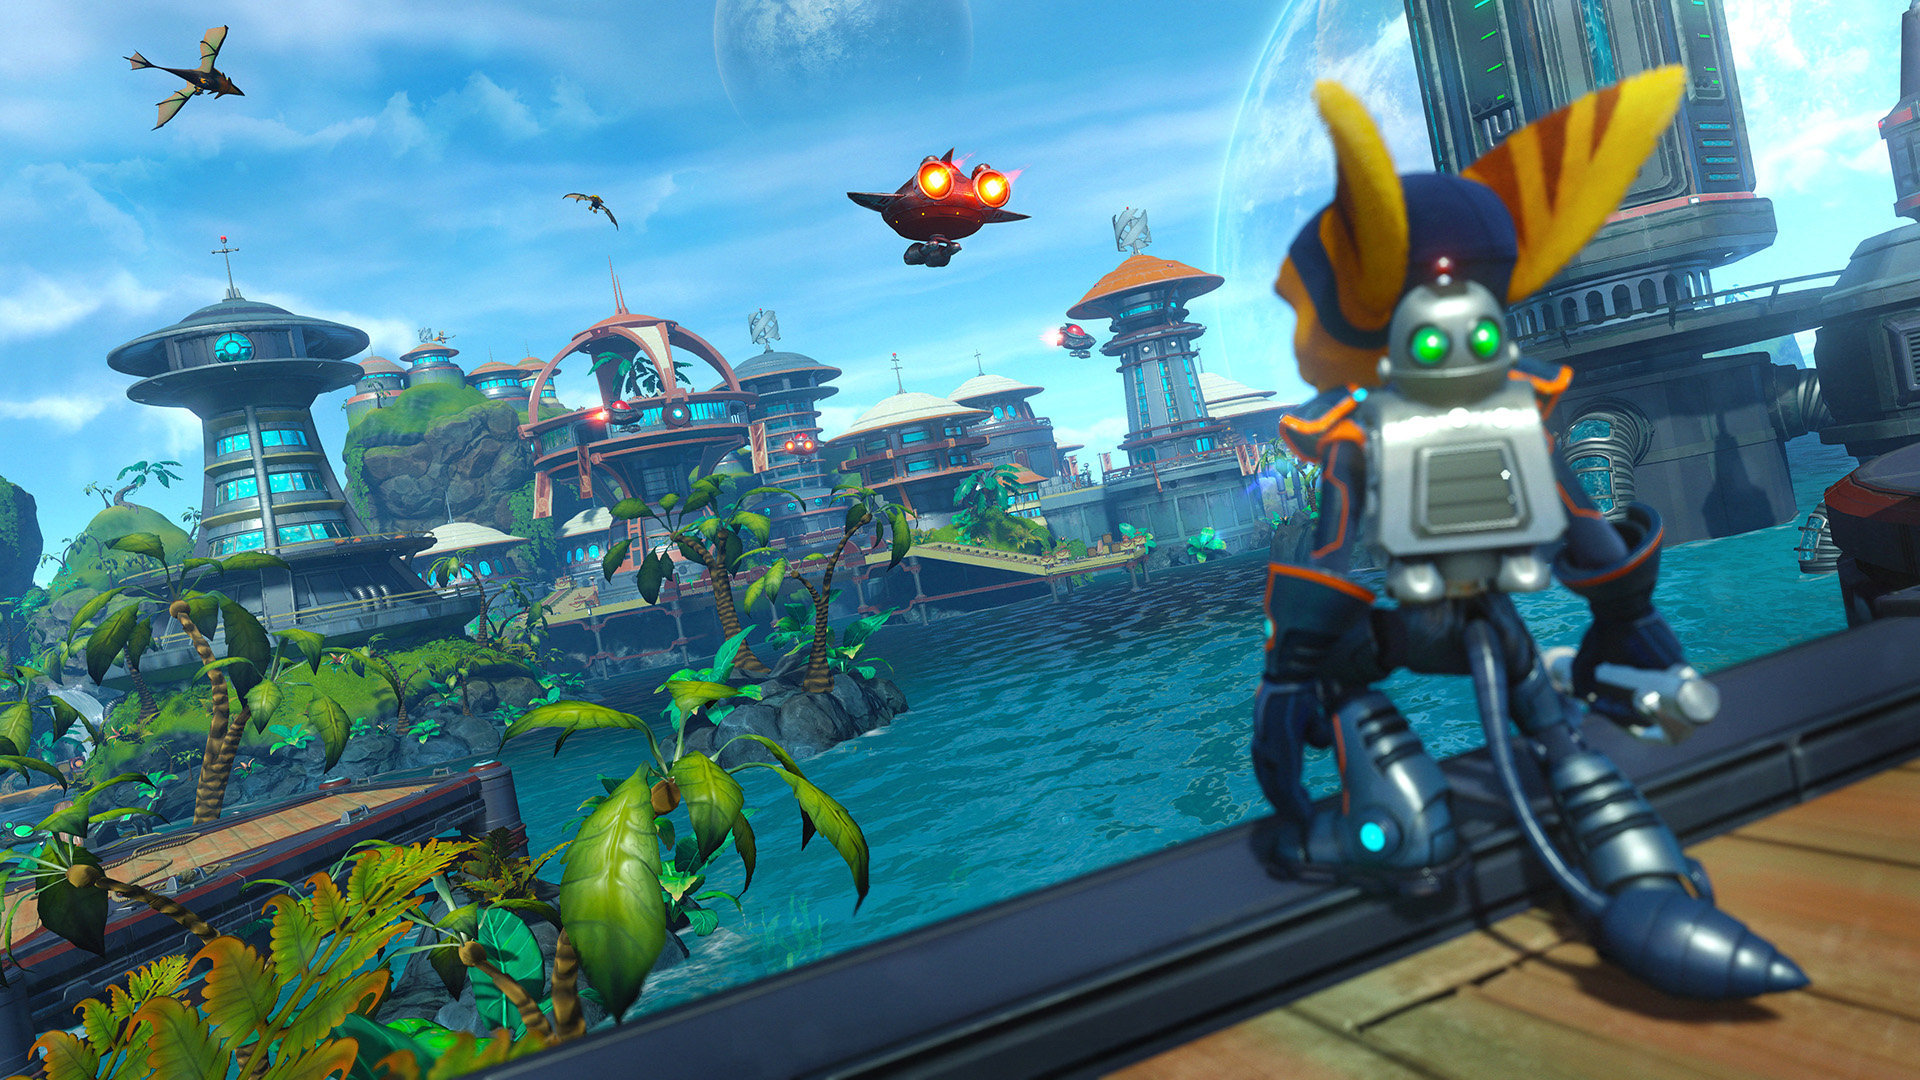 Download full hd 1920x1080 Ratchet and Clank computer background ID:144295 for free